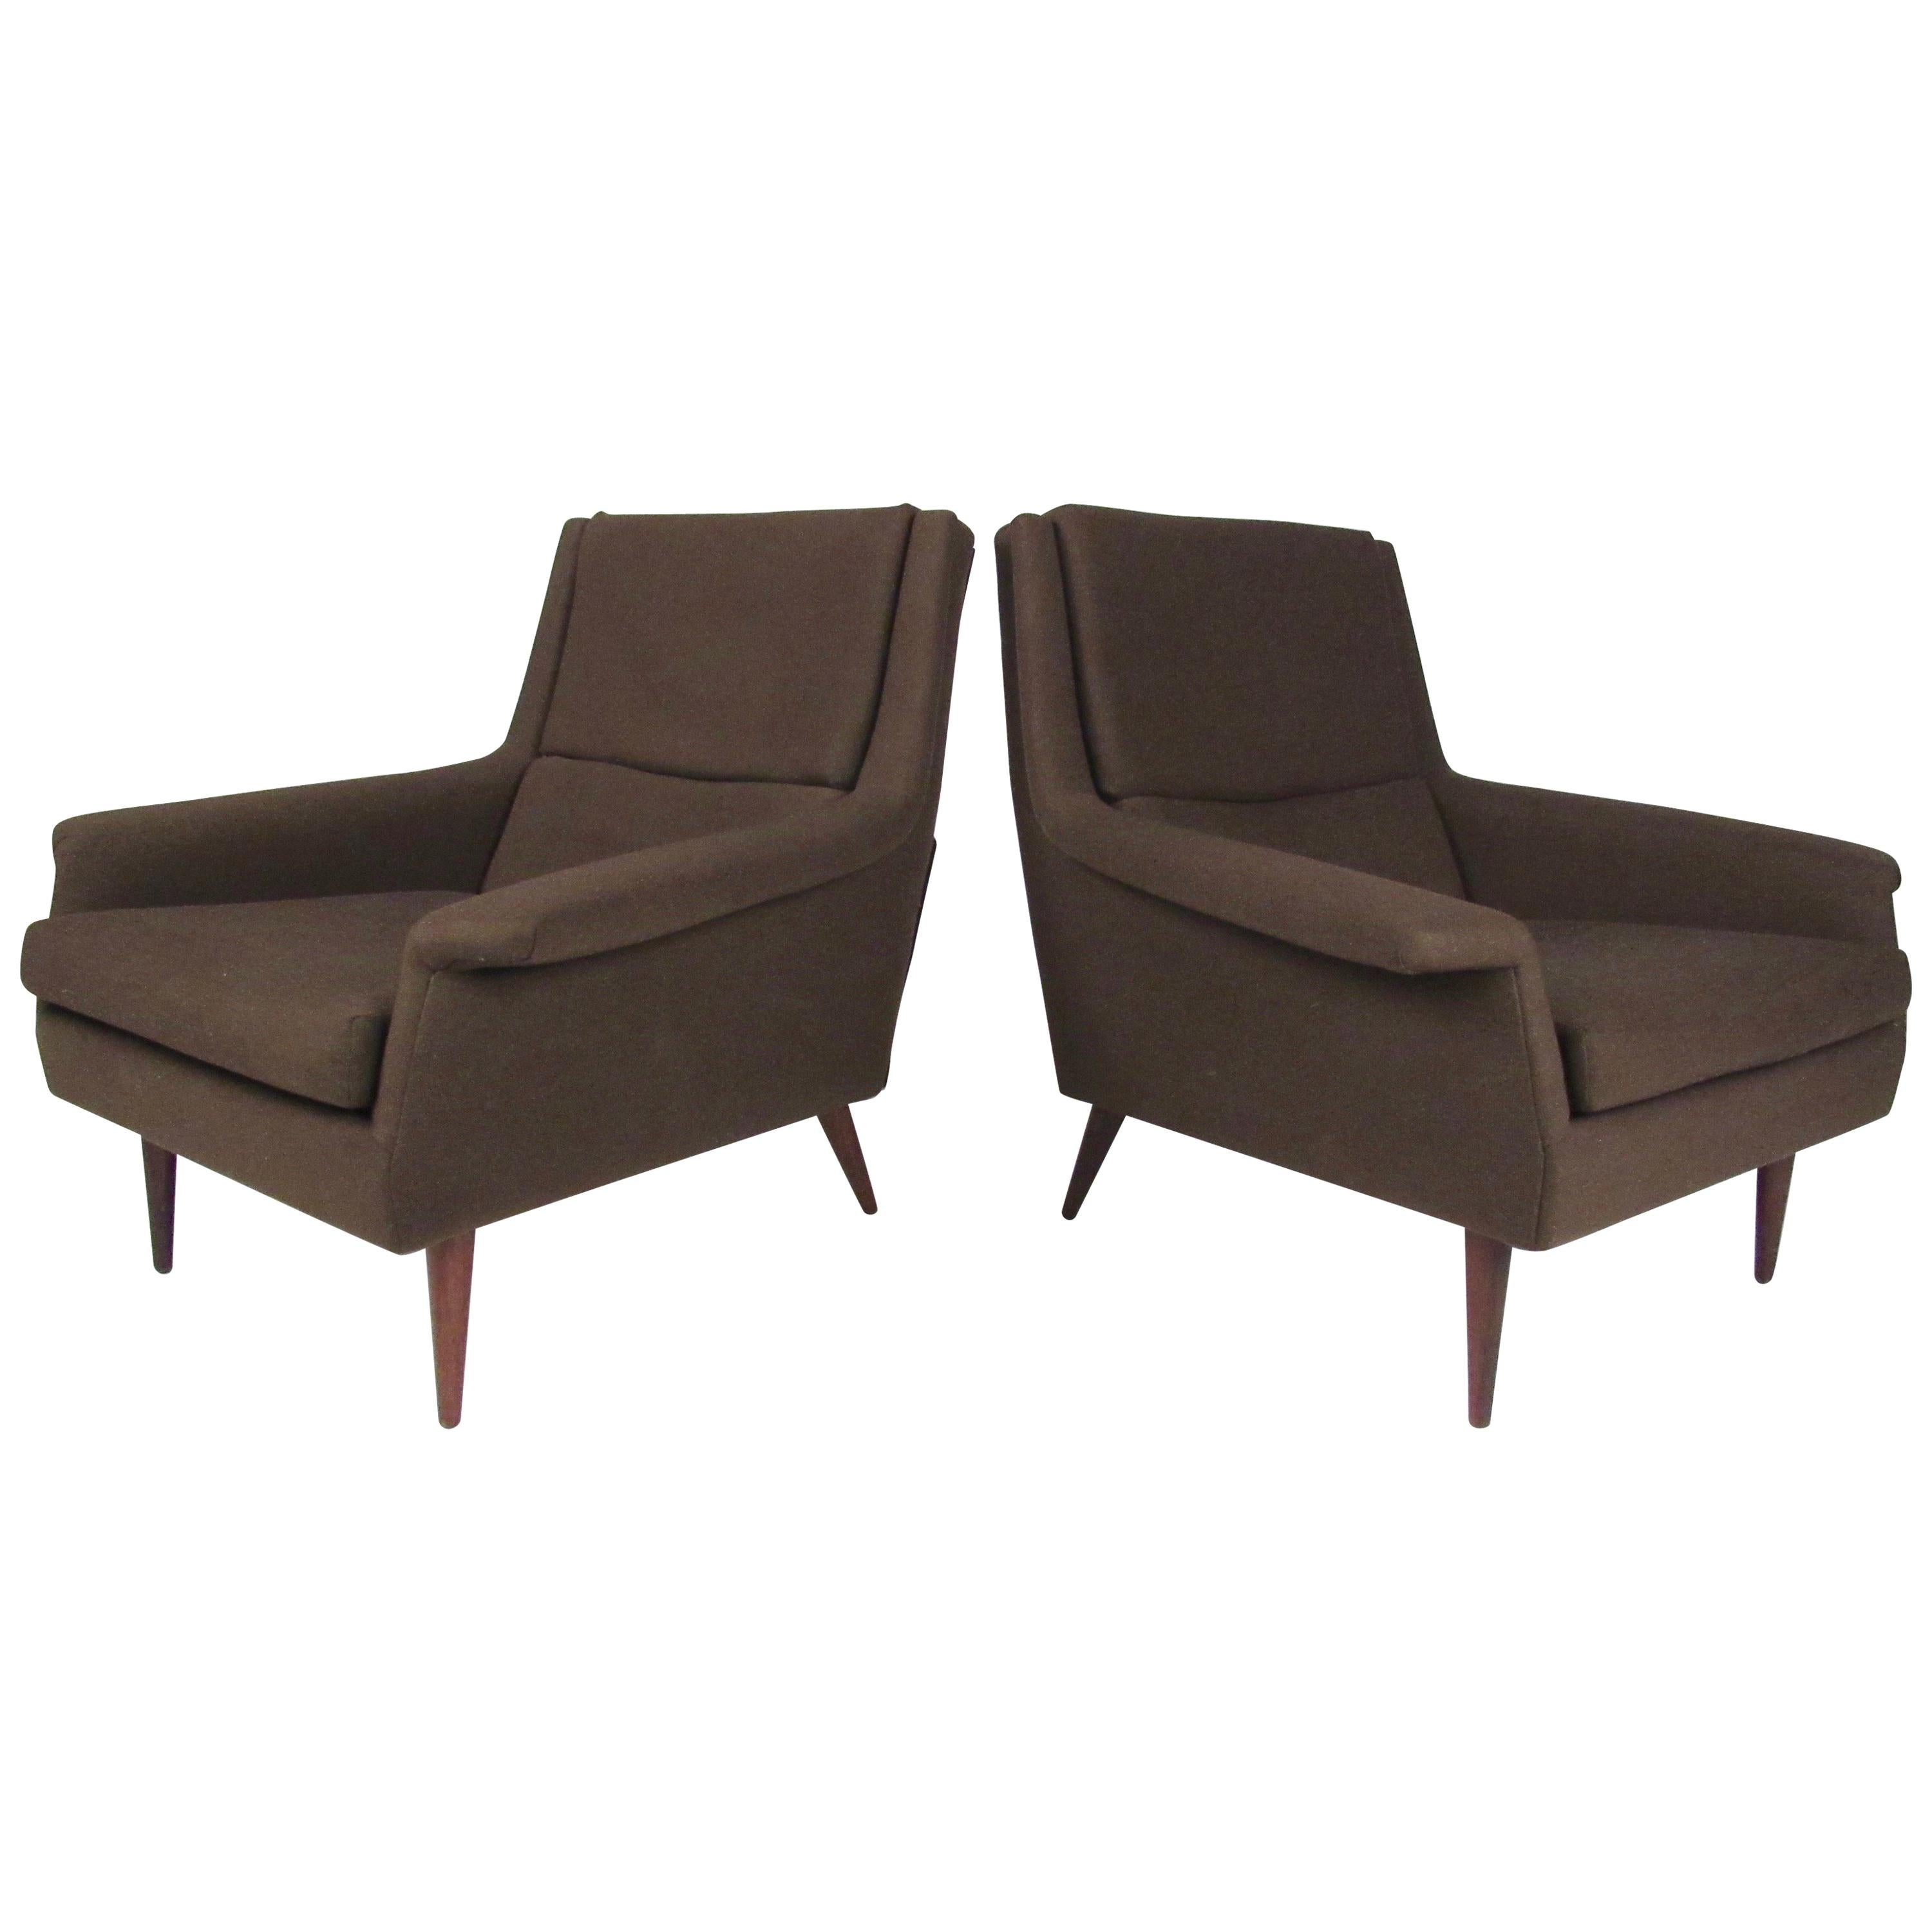 Pair of Milo Baughman Upholstered Lounge Chairs